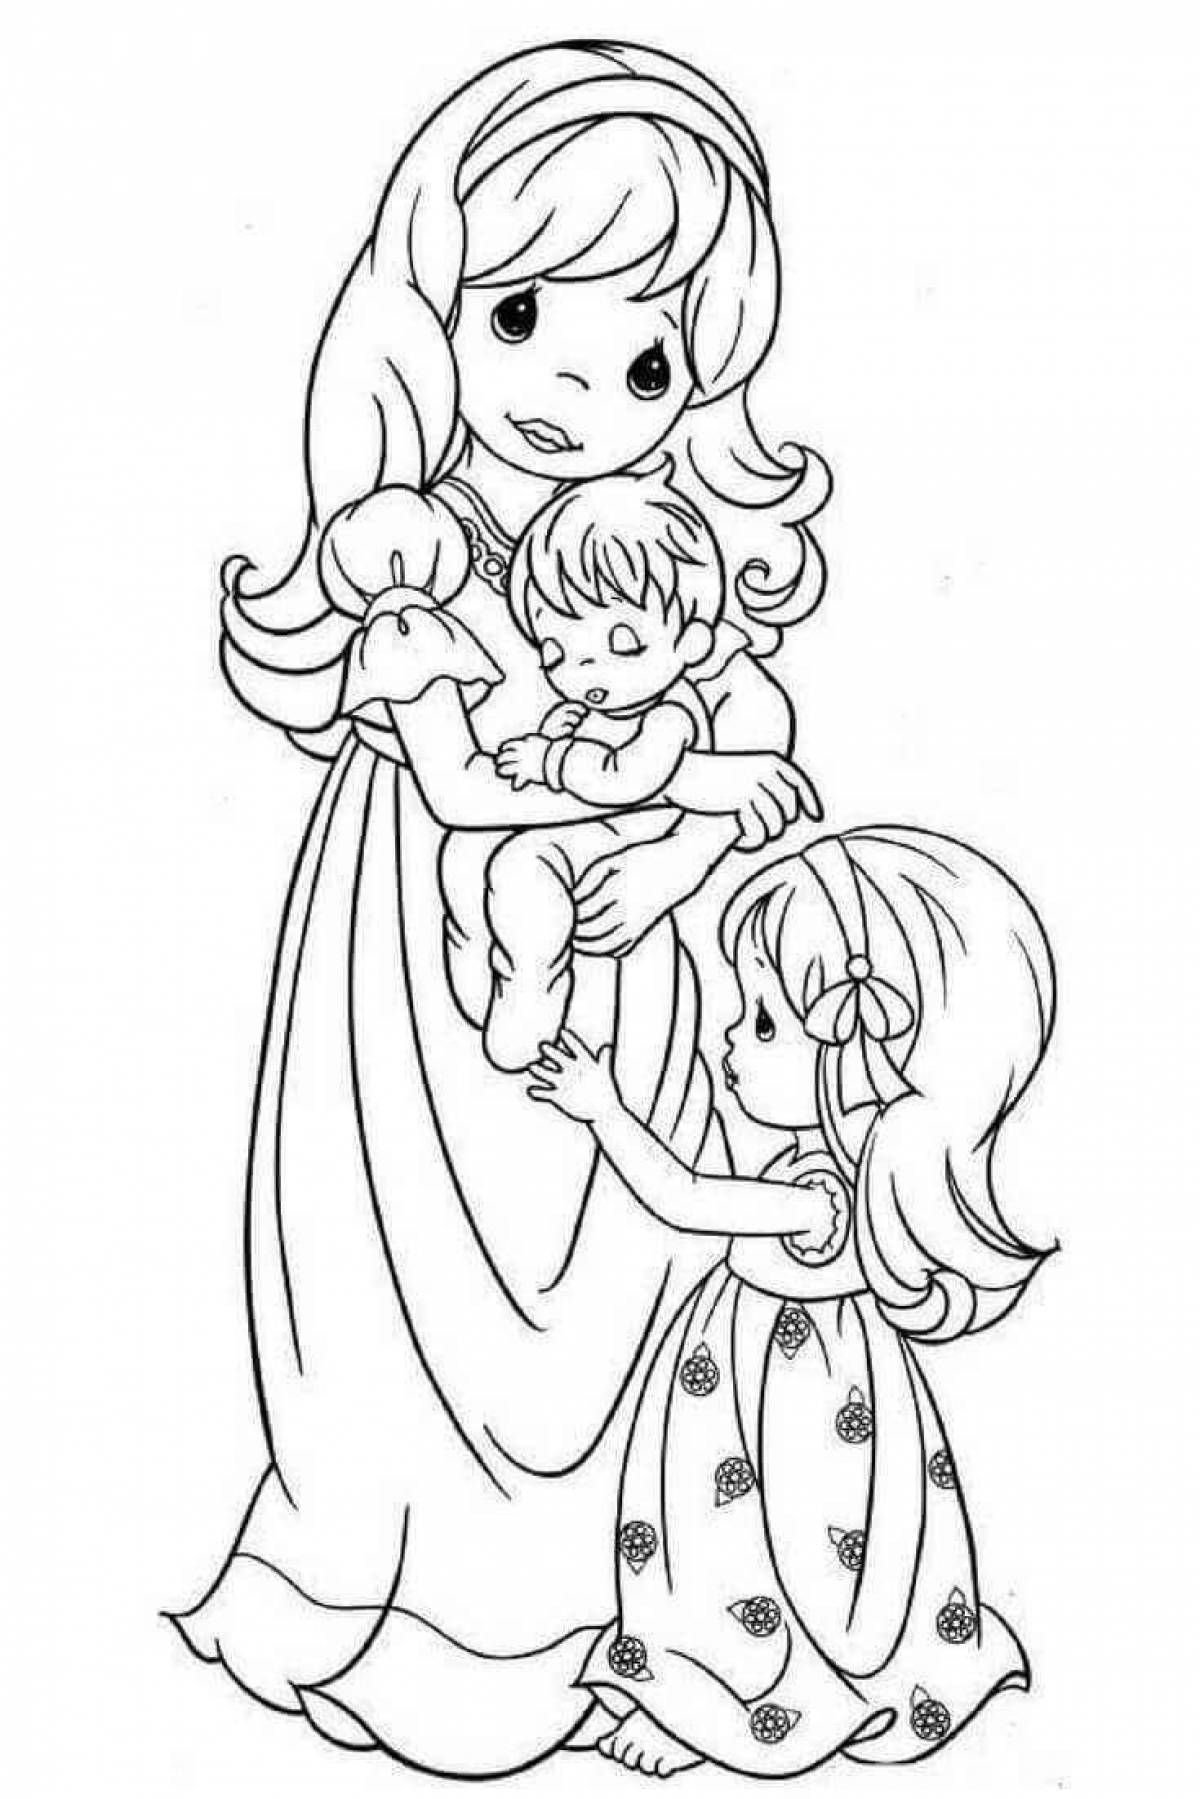 Glowing mom and baby coloring page